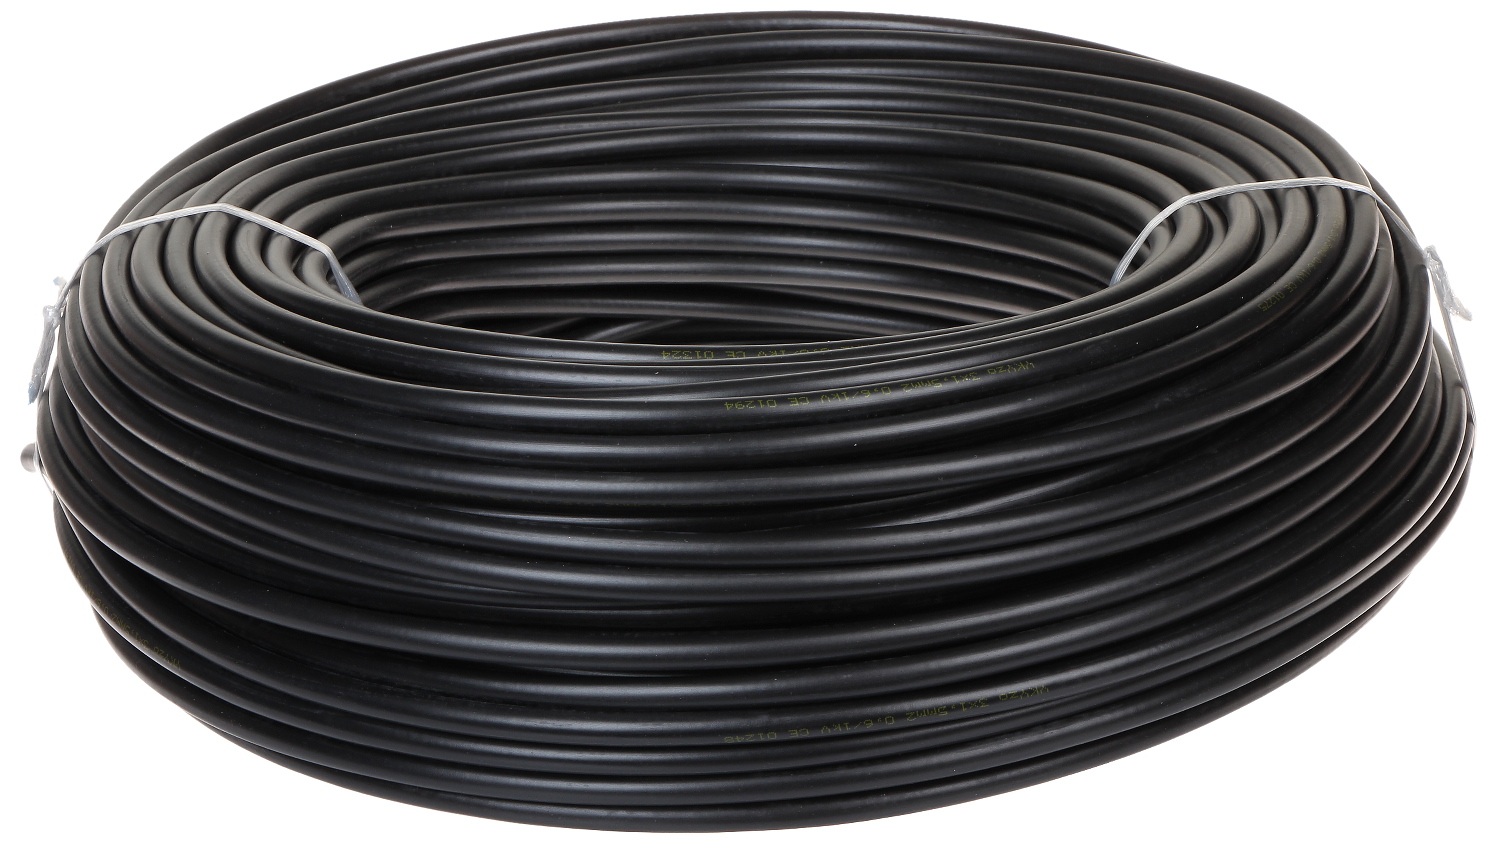 ELECTRIC CABLE YKY-4X1.5 - Wire section up to 1.5mm² - Delta